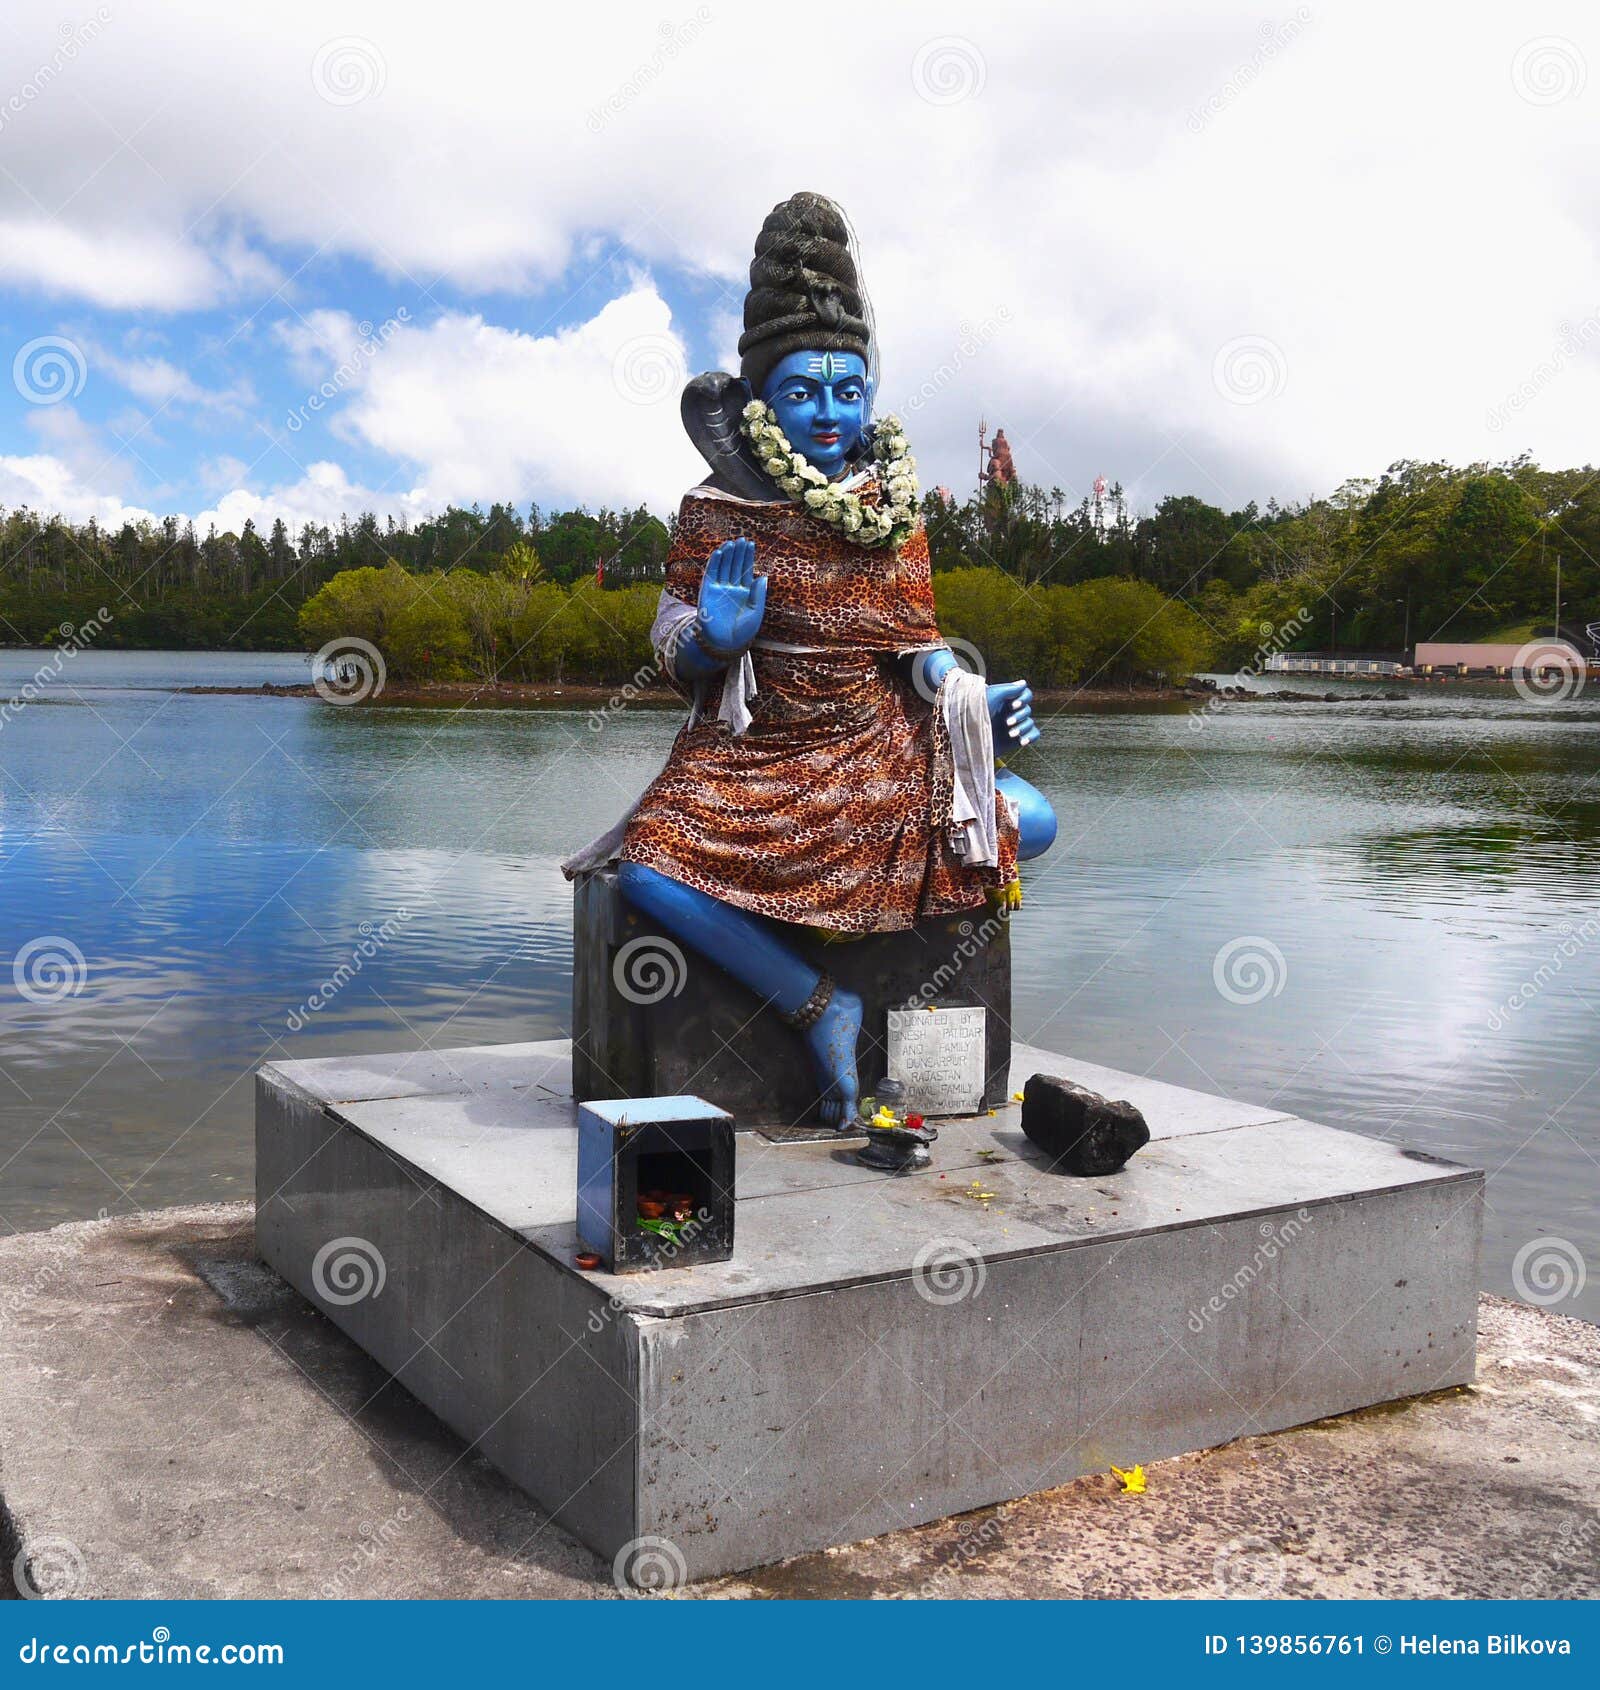 Albums 91+ Images the shiva hindu temple on the island of mauritius is located on which lake? Full HD, 2k, 4k